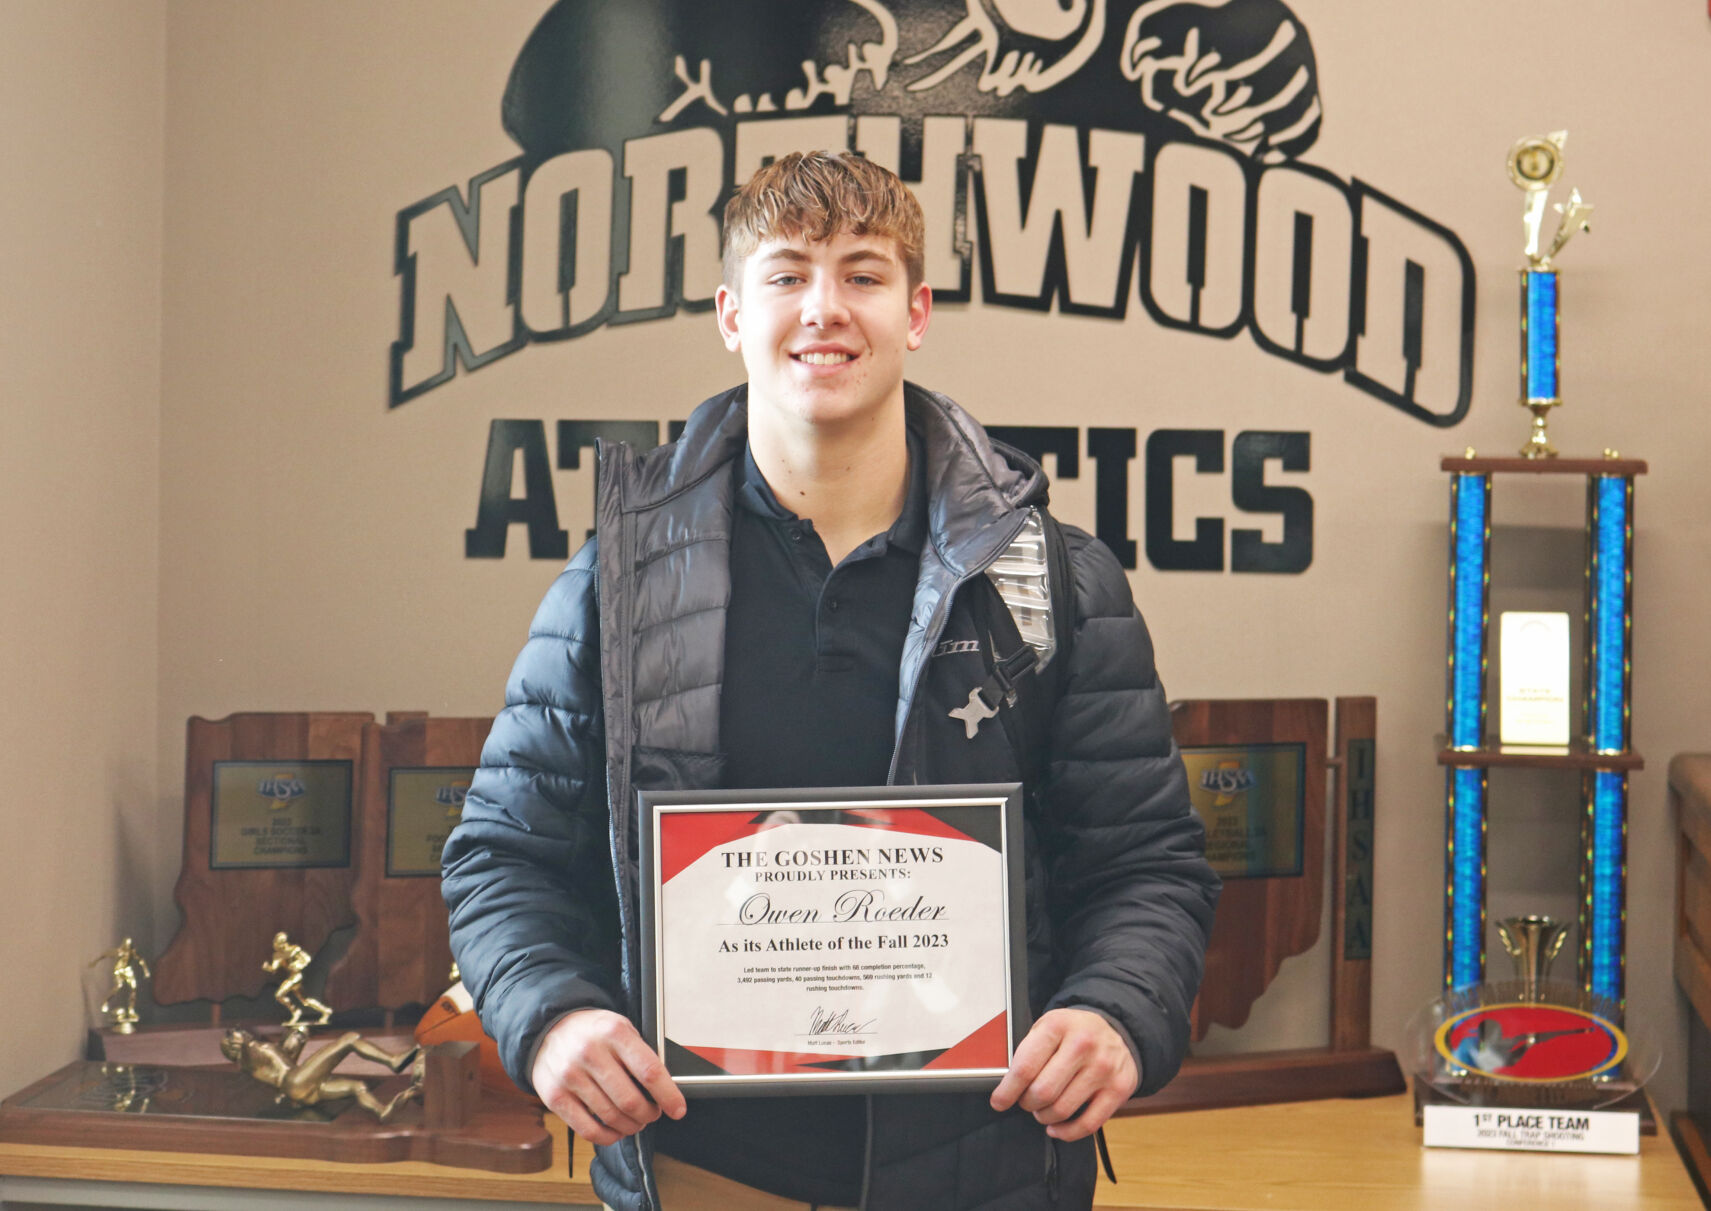 Owen Roeder Named Goshen News Athlete of the Fall 2023 after Stellar Performance